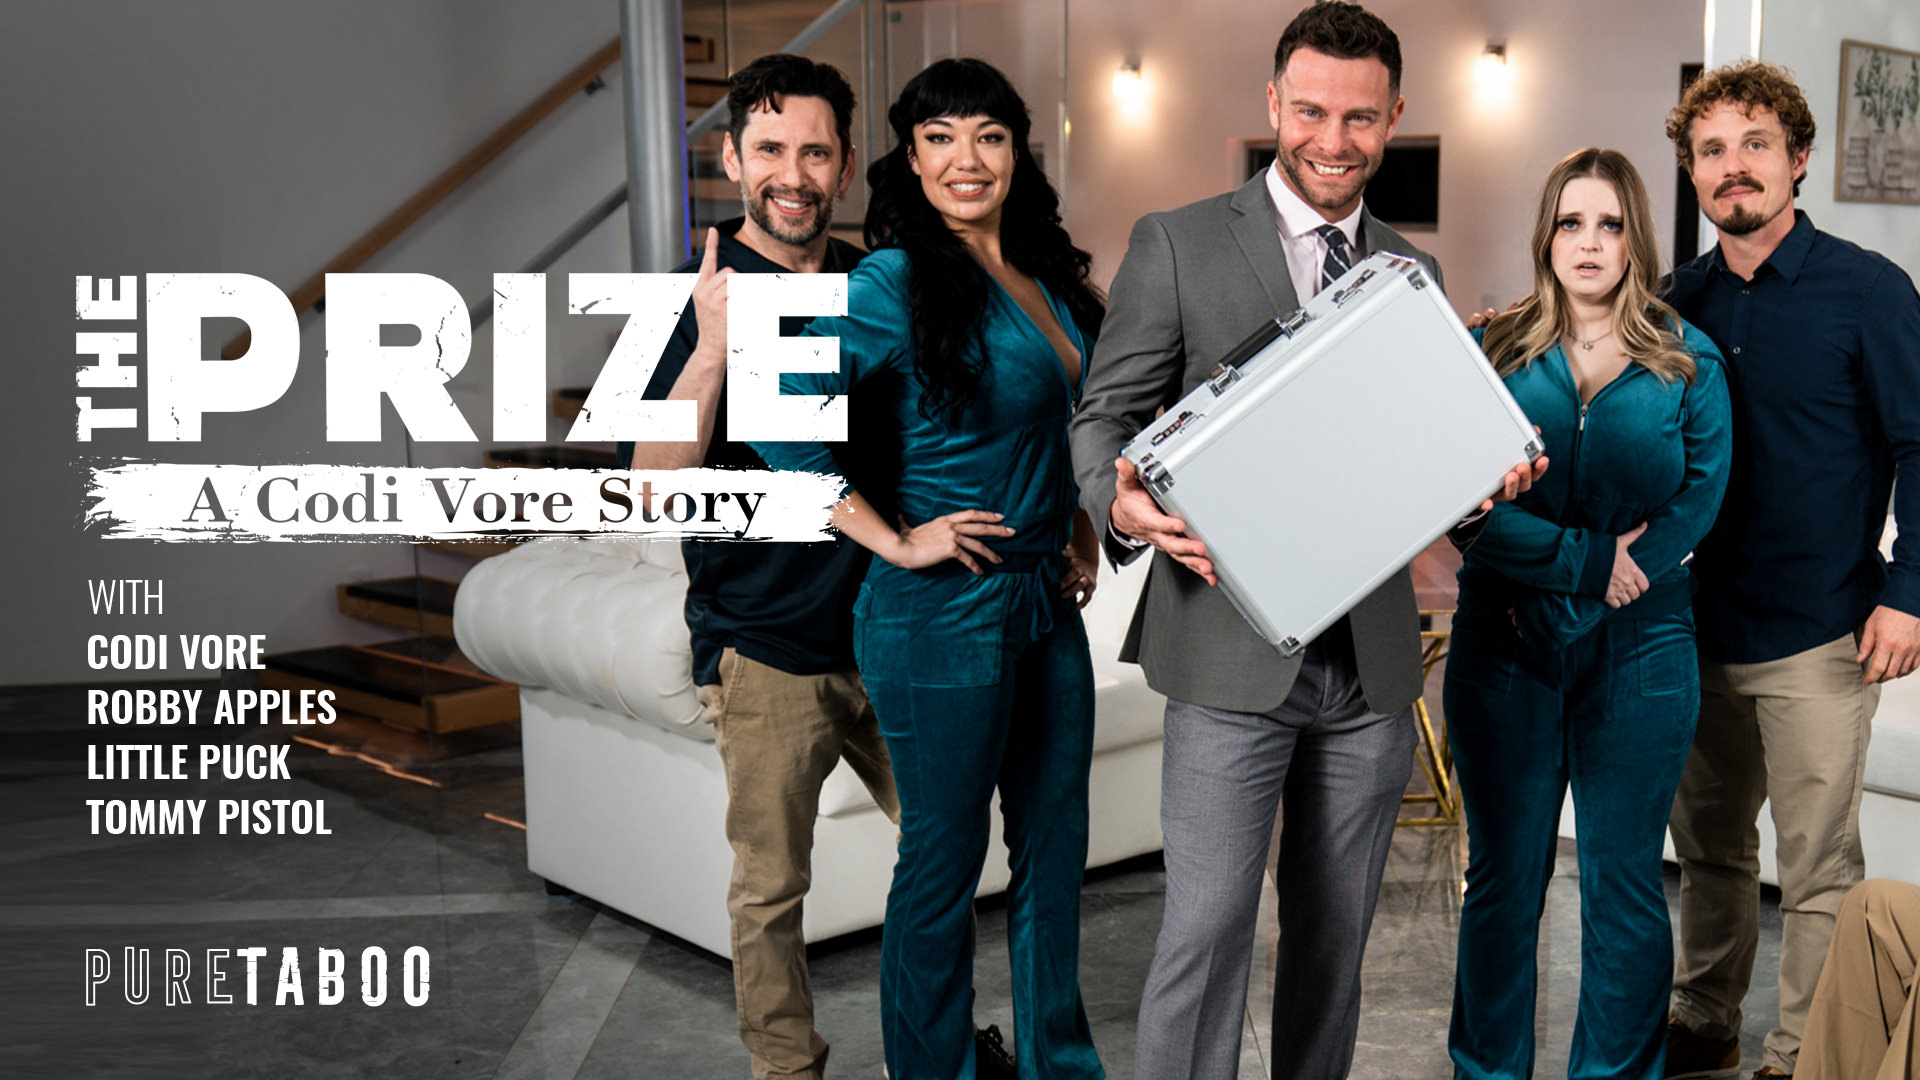 PureTaboo Tommy Pistol, Robby Apples, Codi Vore, Little Puck – The Prize: A Codi Vore Story